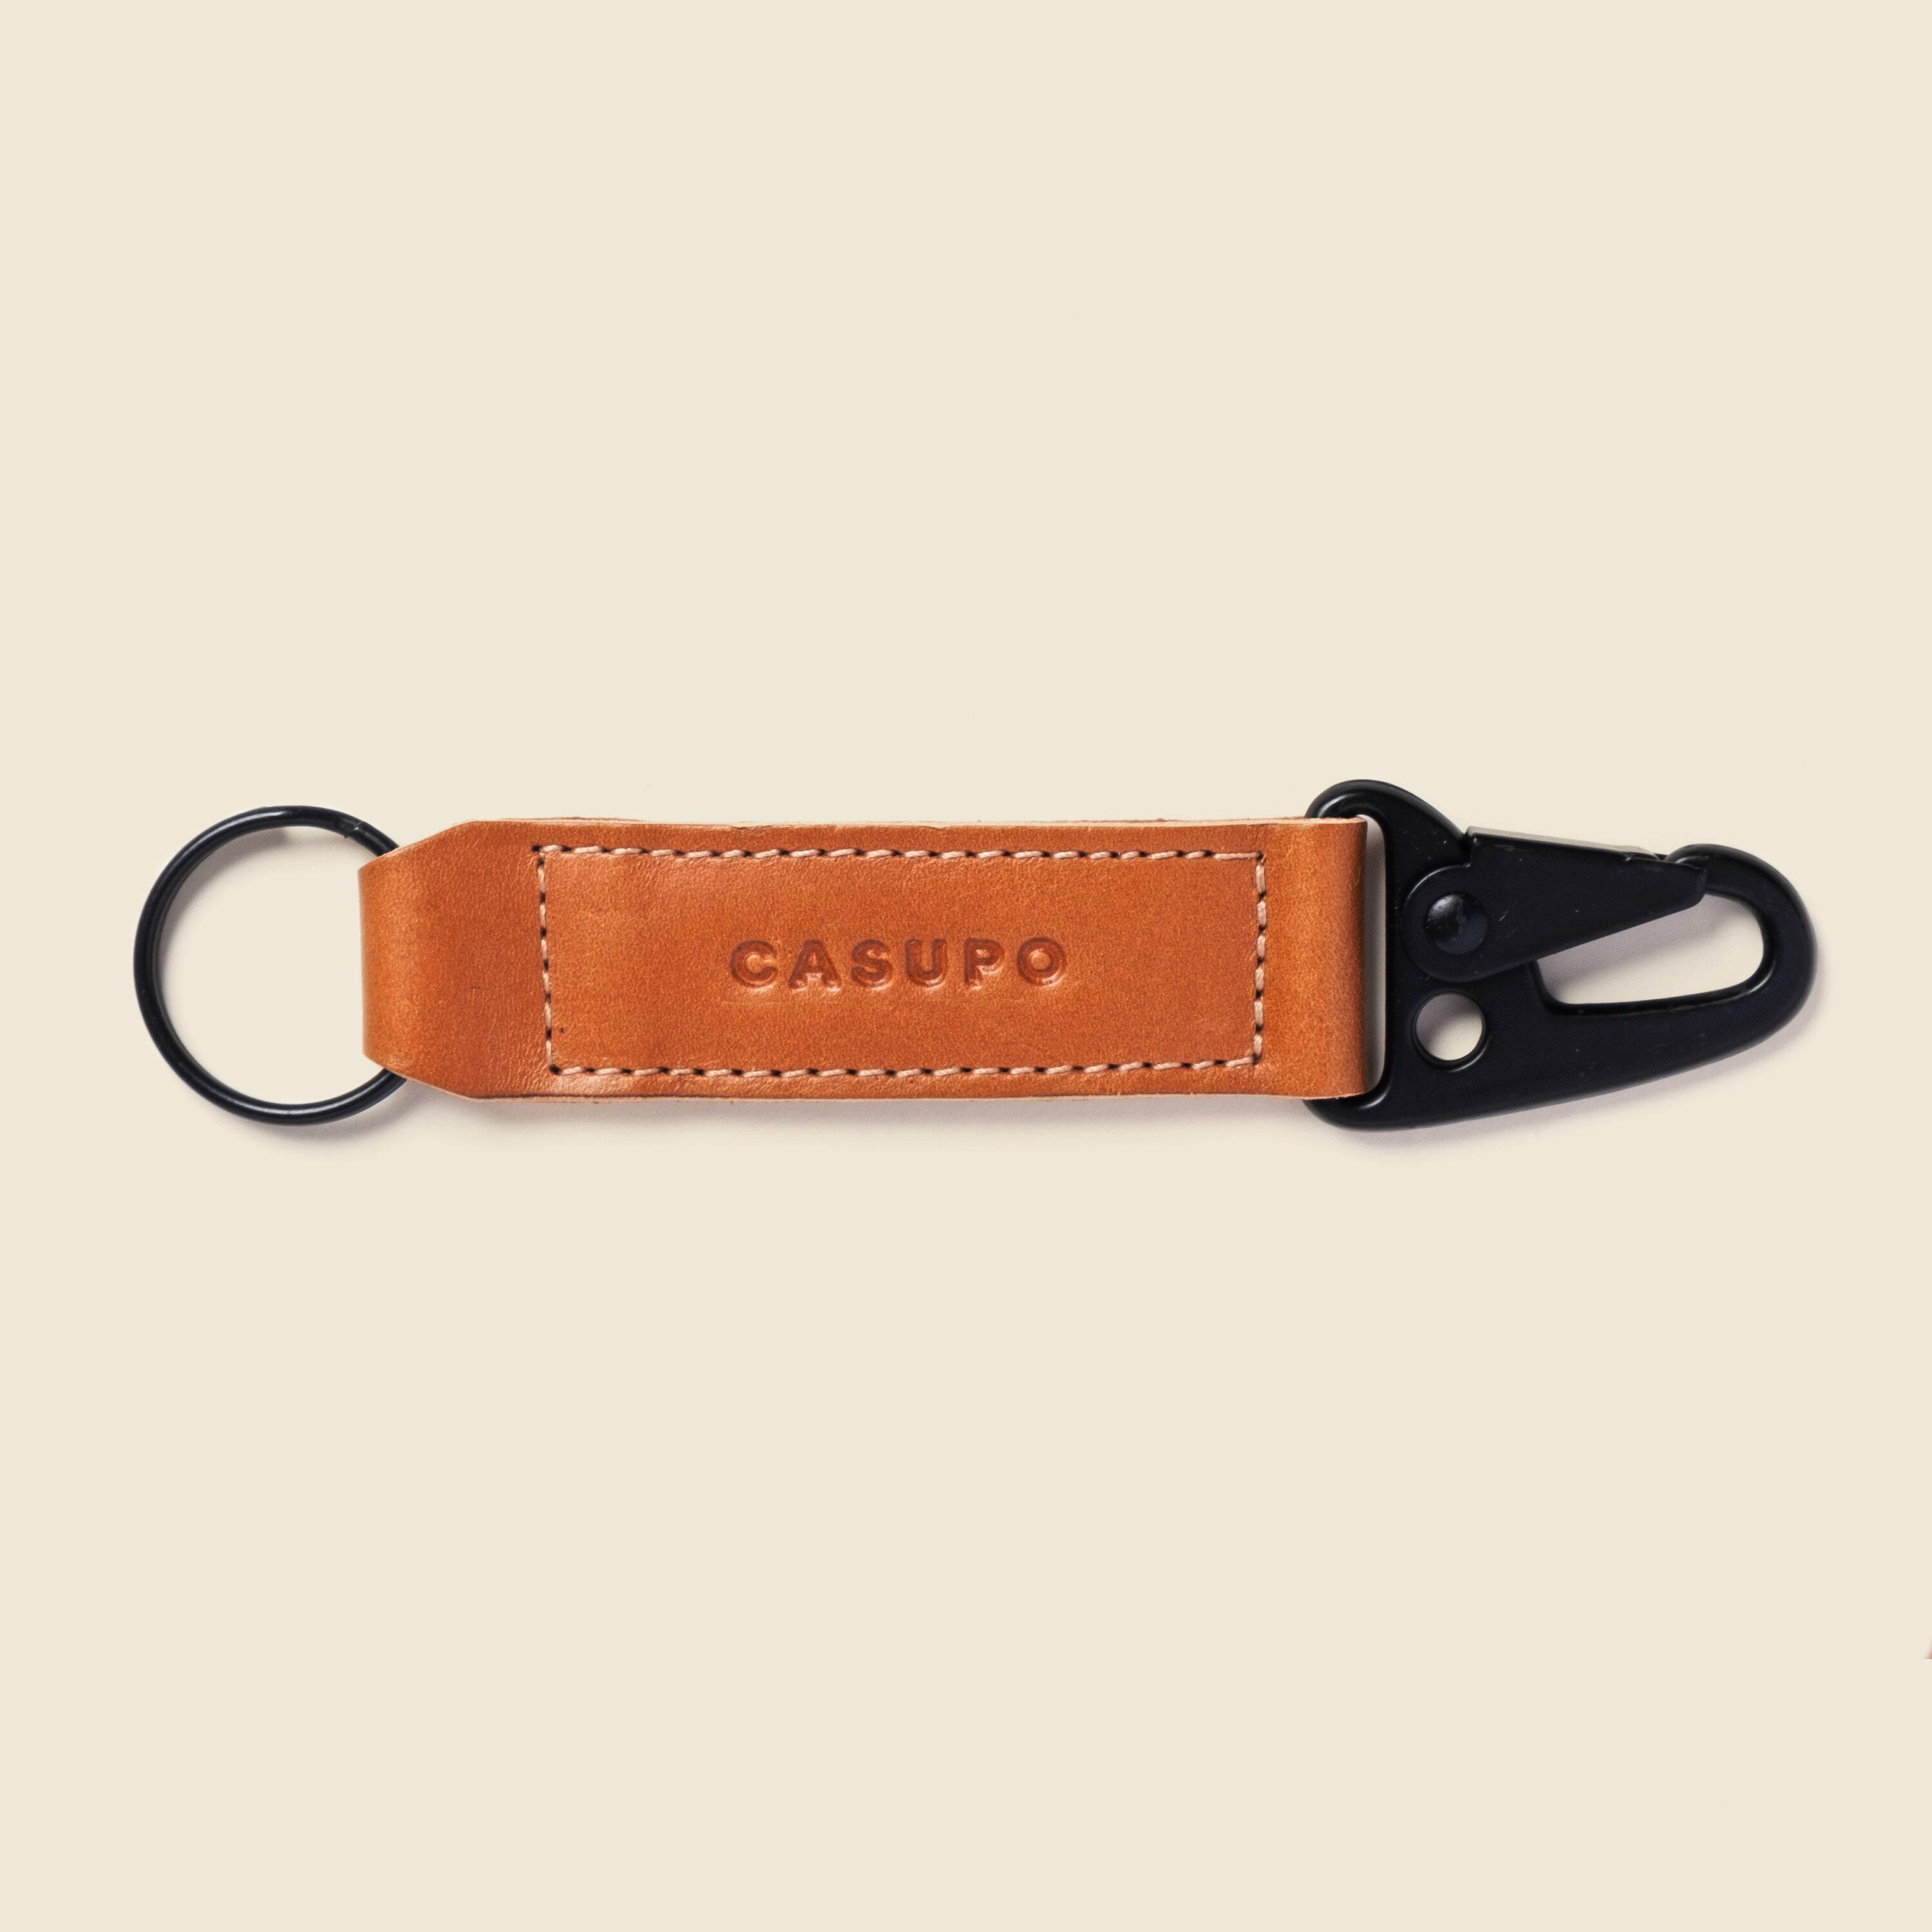 Belt Snap Keychain - Natural & Tan Leather, Personalized Leather Key Chain, Father's Day Gift, Dad Gift, Gift For Dad